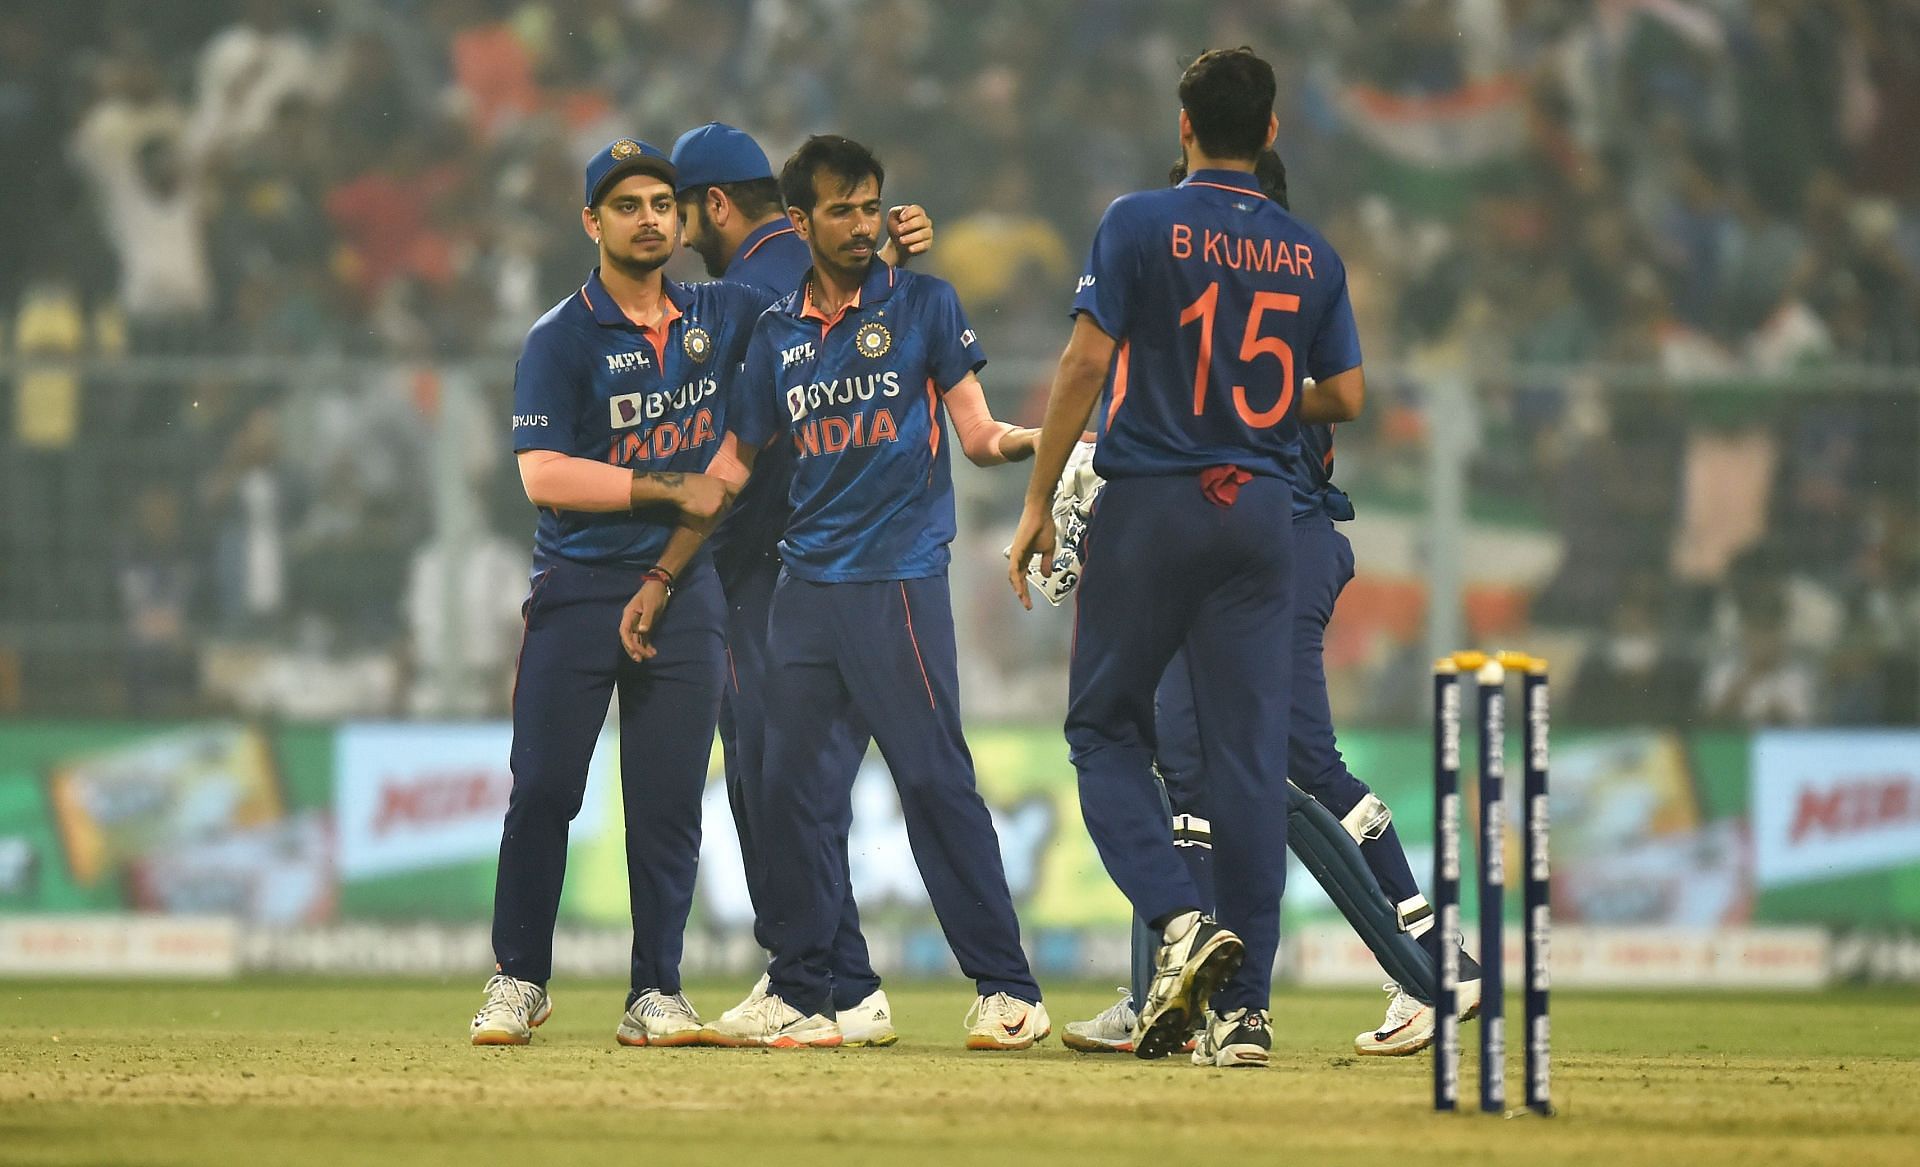 Yuzvendra Chahal during a T20I encounter. Pic: Getty Images